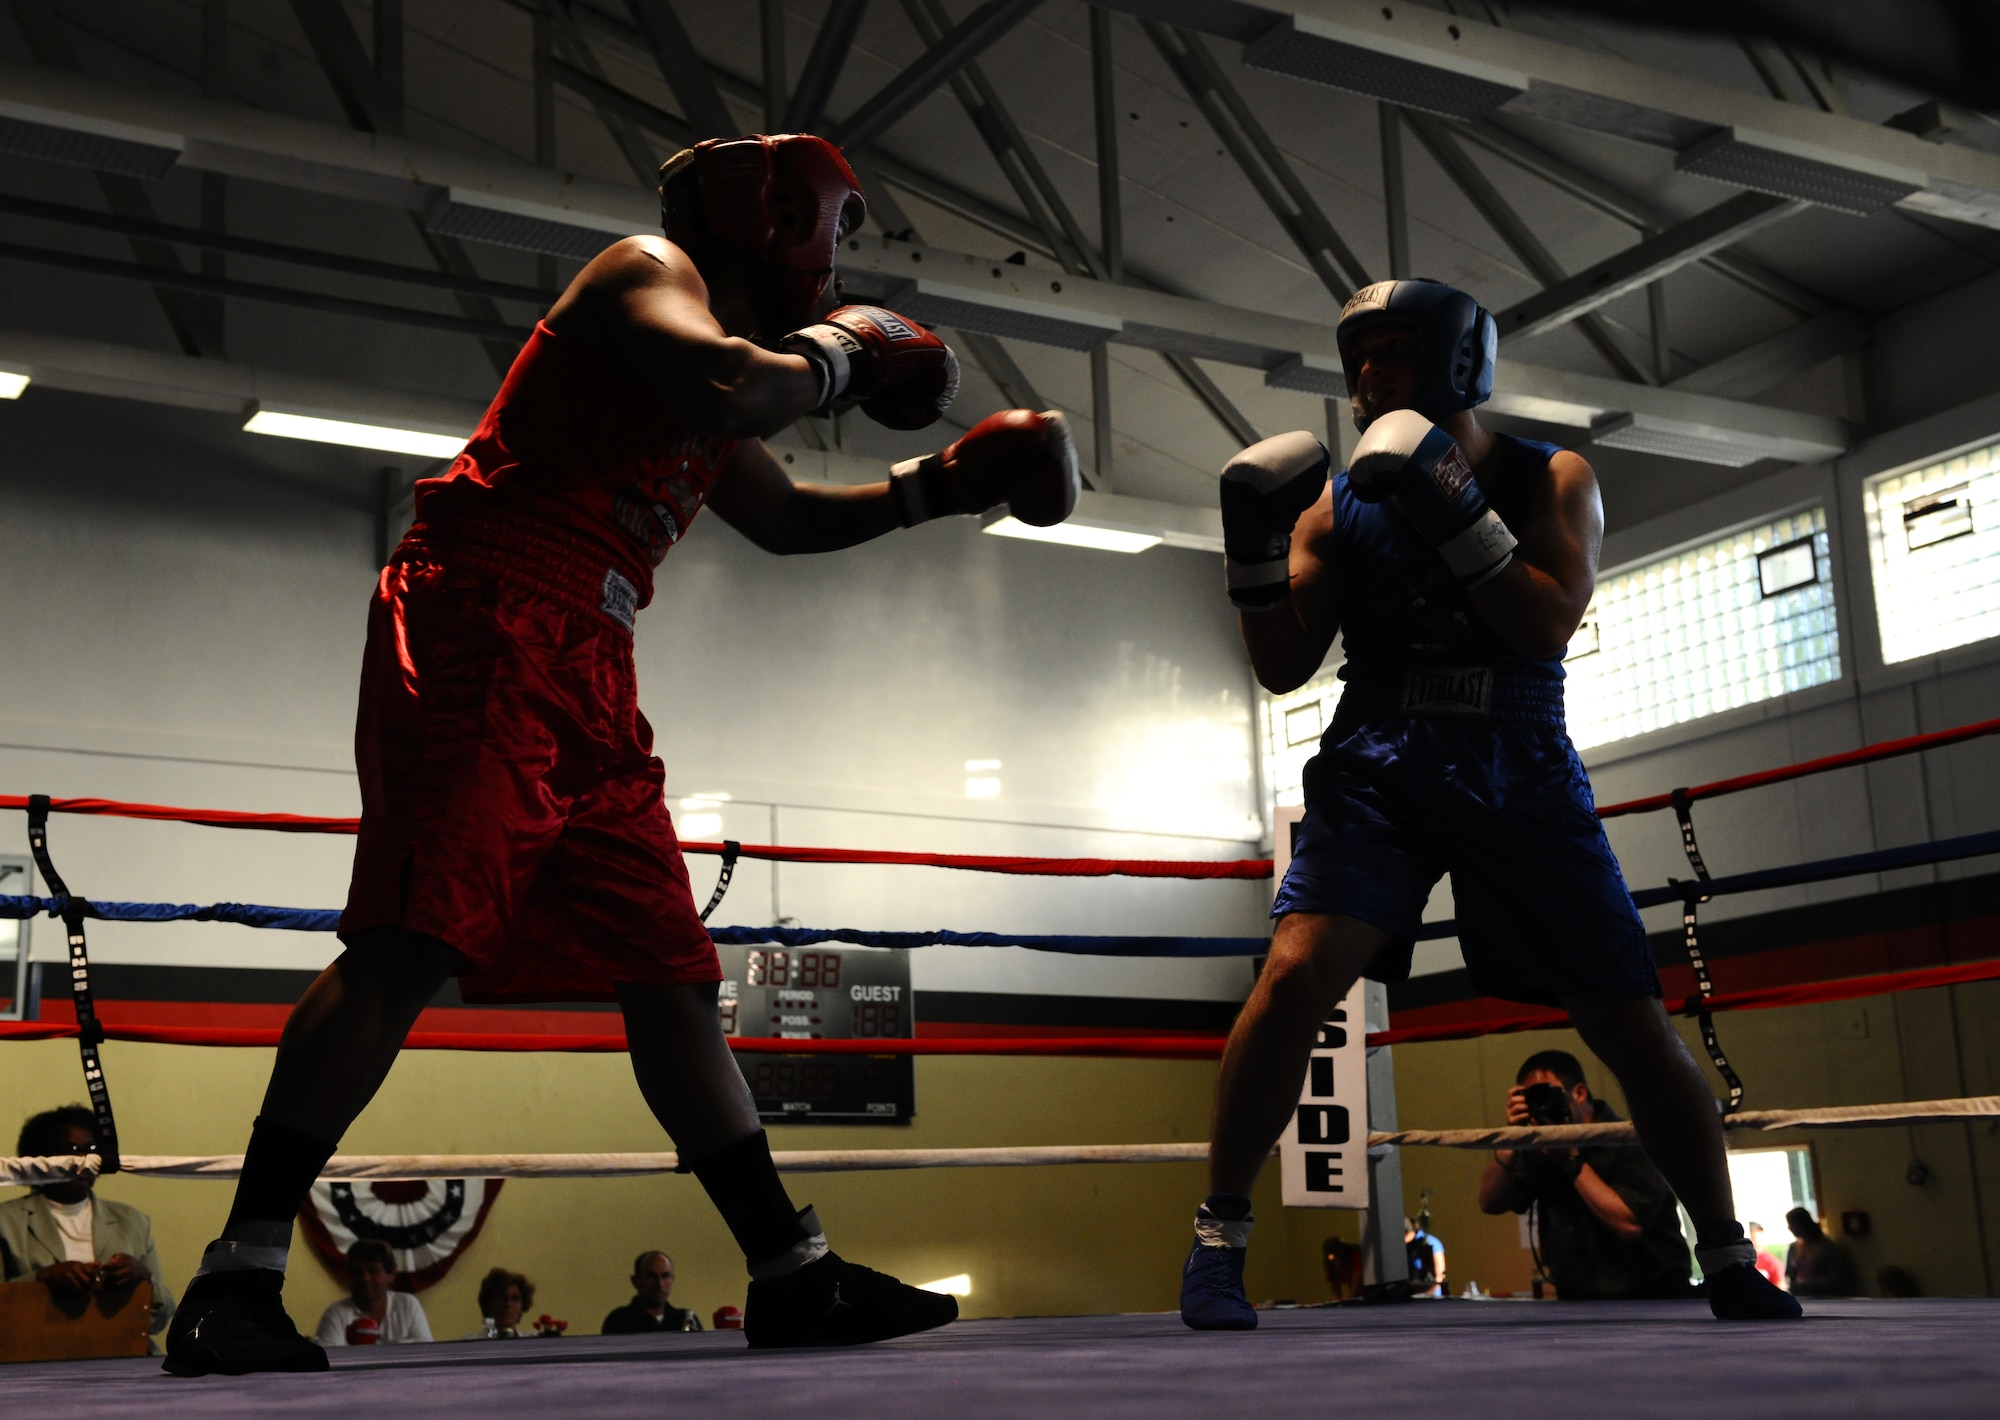 MIESAU, Germany – Senior Airmen Ronreco Smith, 52nd Communications Squadron, and Kevin Shields, 786th Civil Engineer Squadron, face off during a match at the U.S. Army Installation Management Command-Europe Boxing Invitational here June 23. Thirty service members competed at the invitational, which was open to all amateur boxers. (U.S. Air Force photo by Staff Sgt. Nathanael Callon/Released)